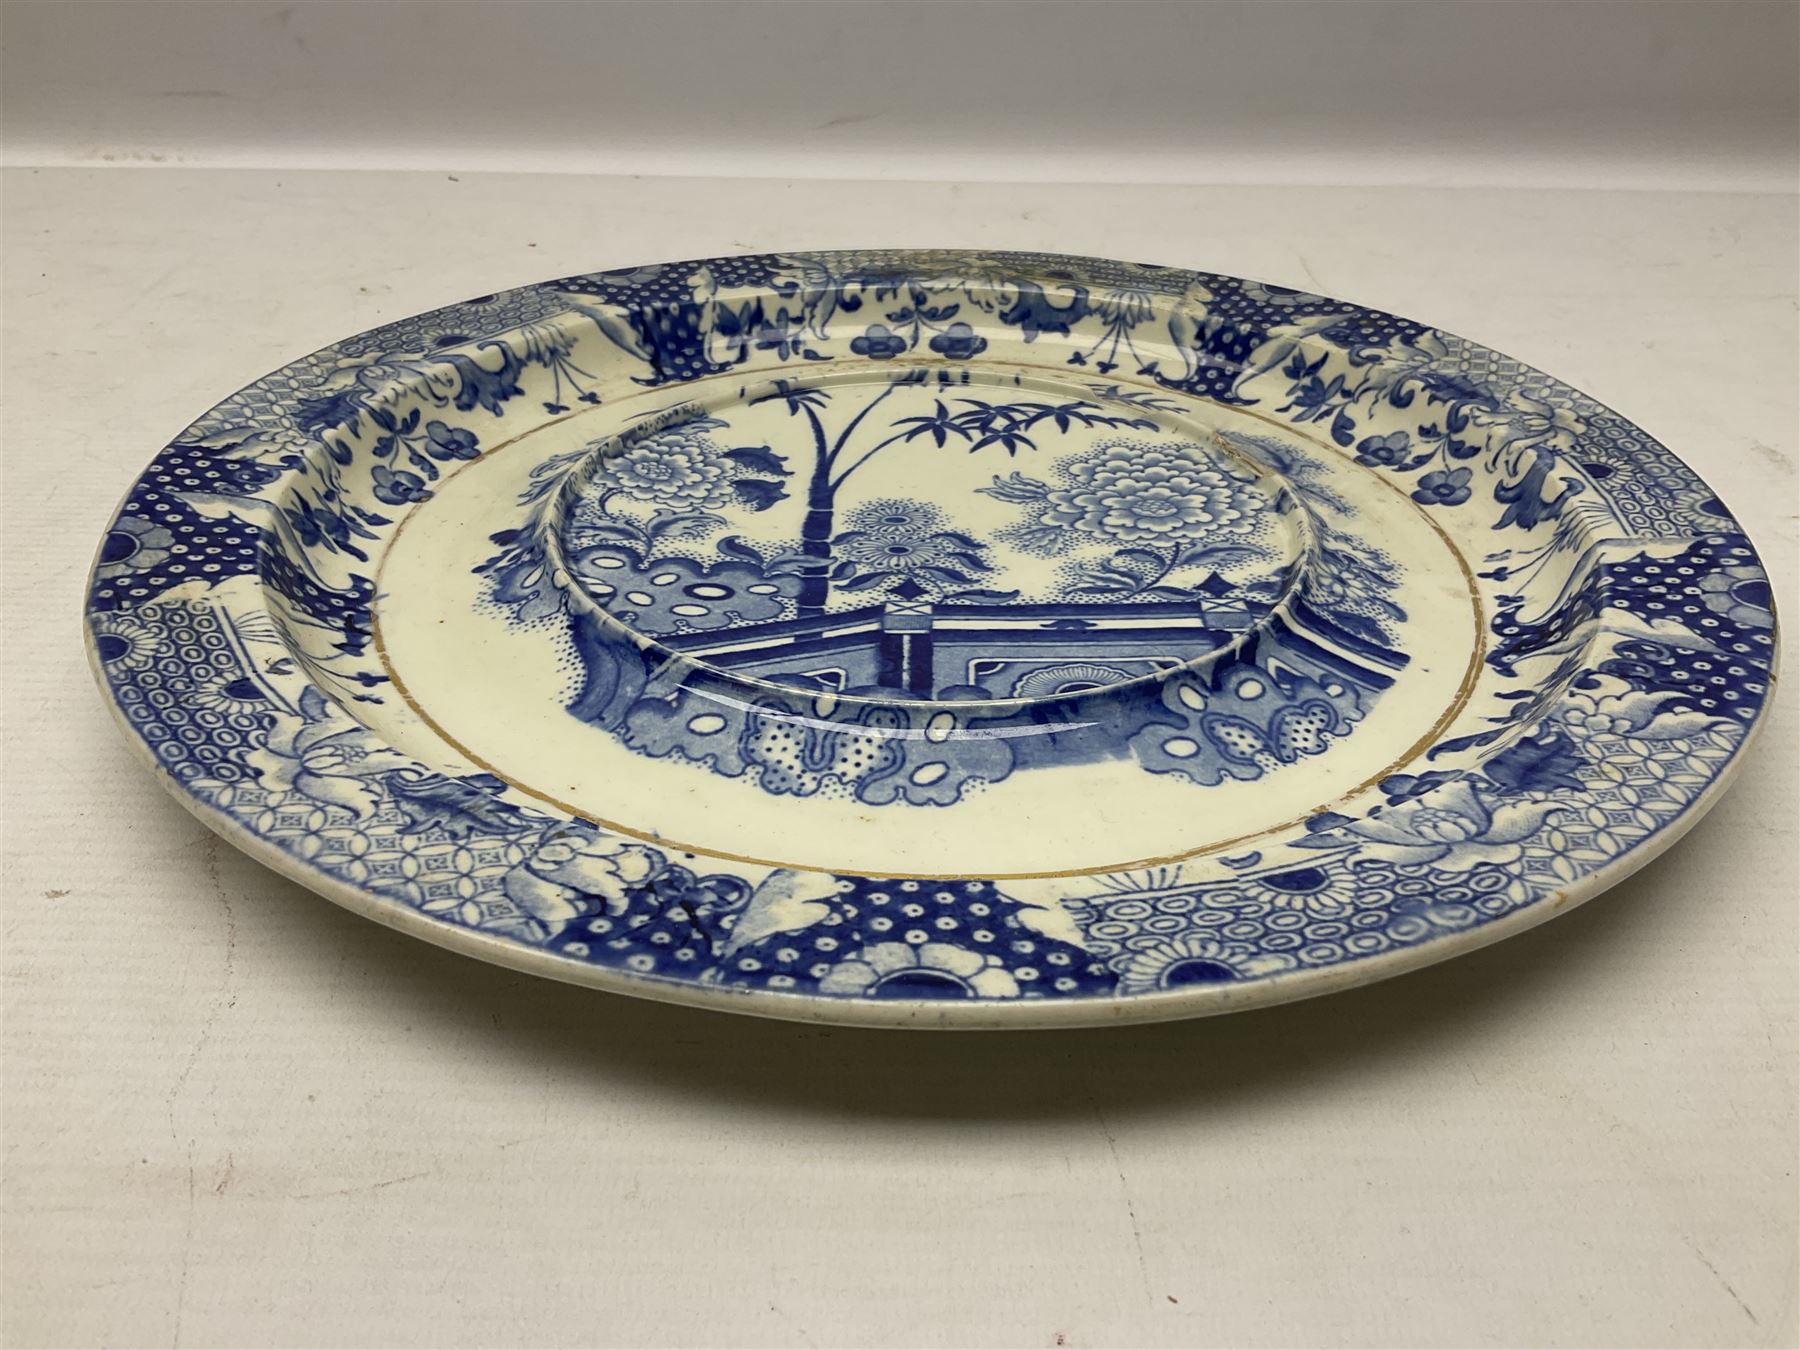 19th century Davenport bamboo and peony pattern dinner wares - Image 15 of 17